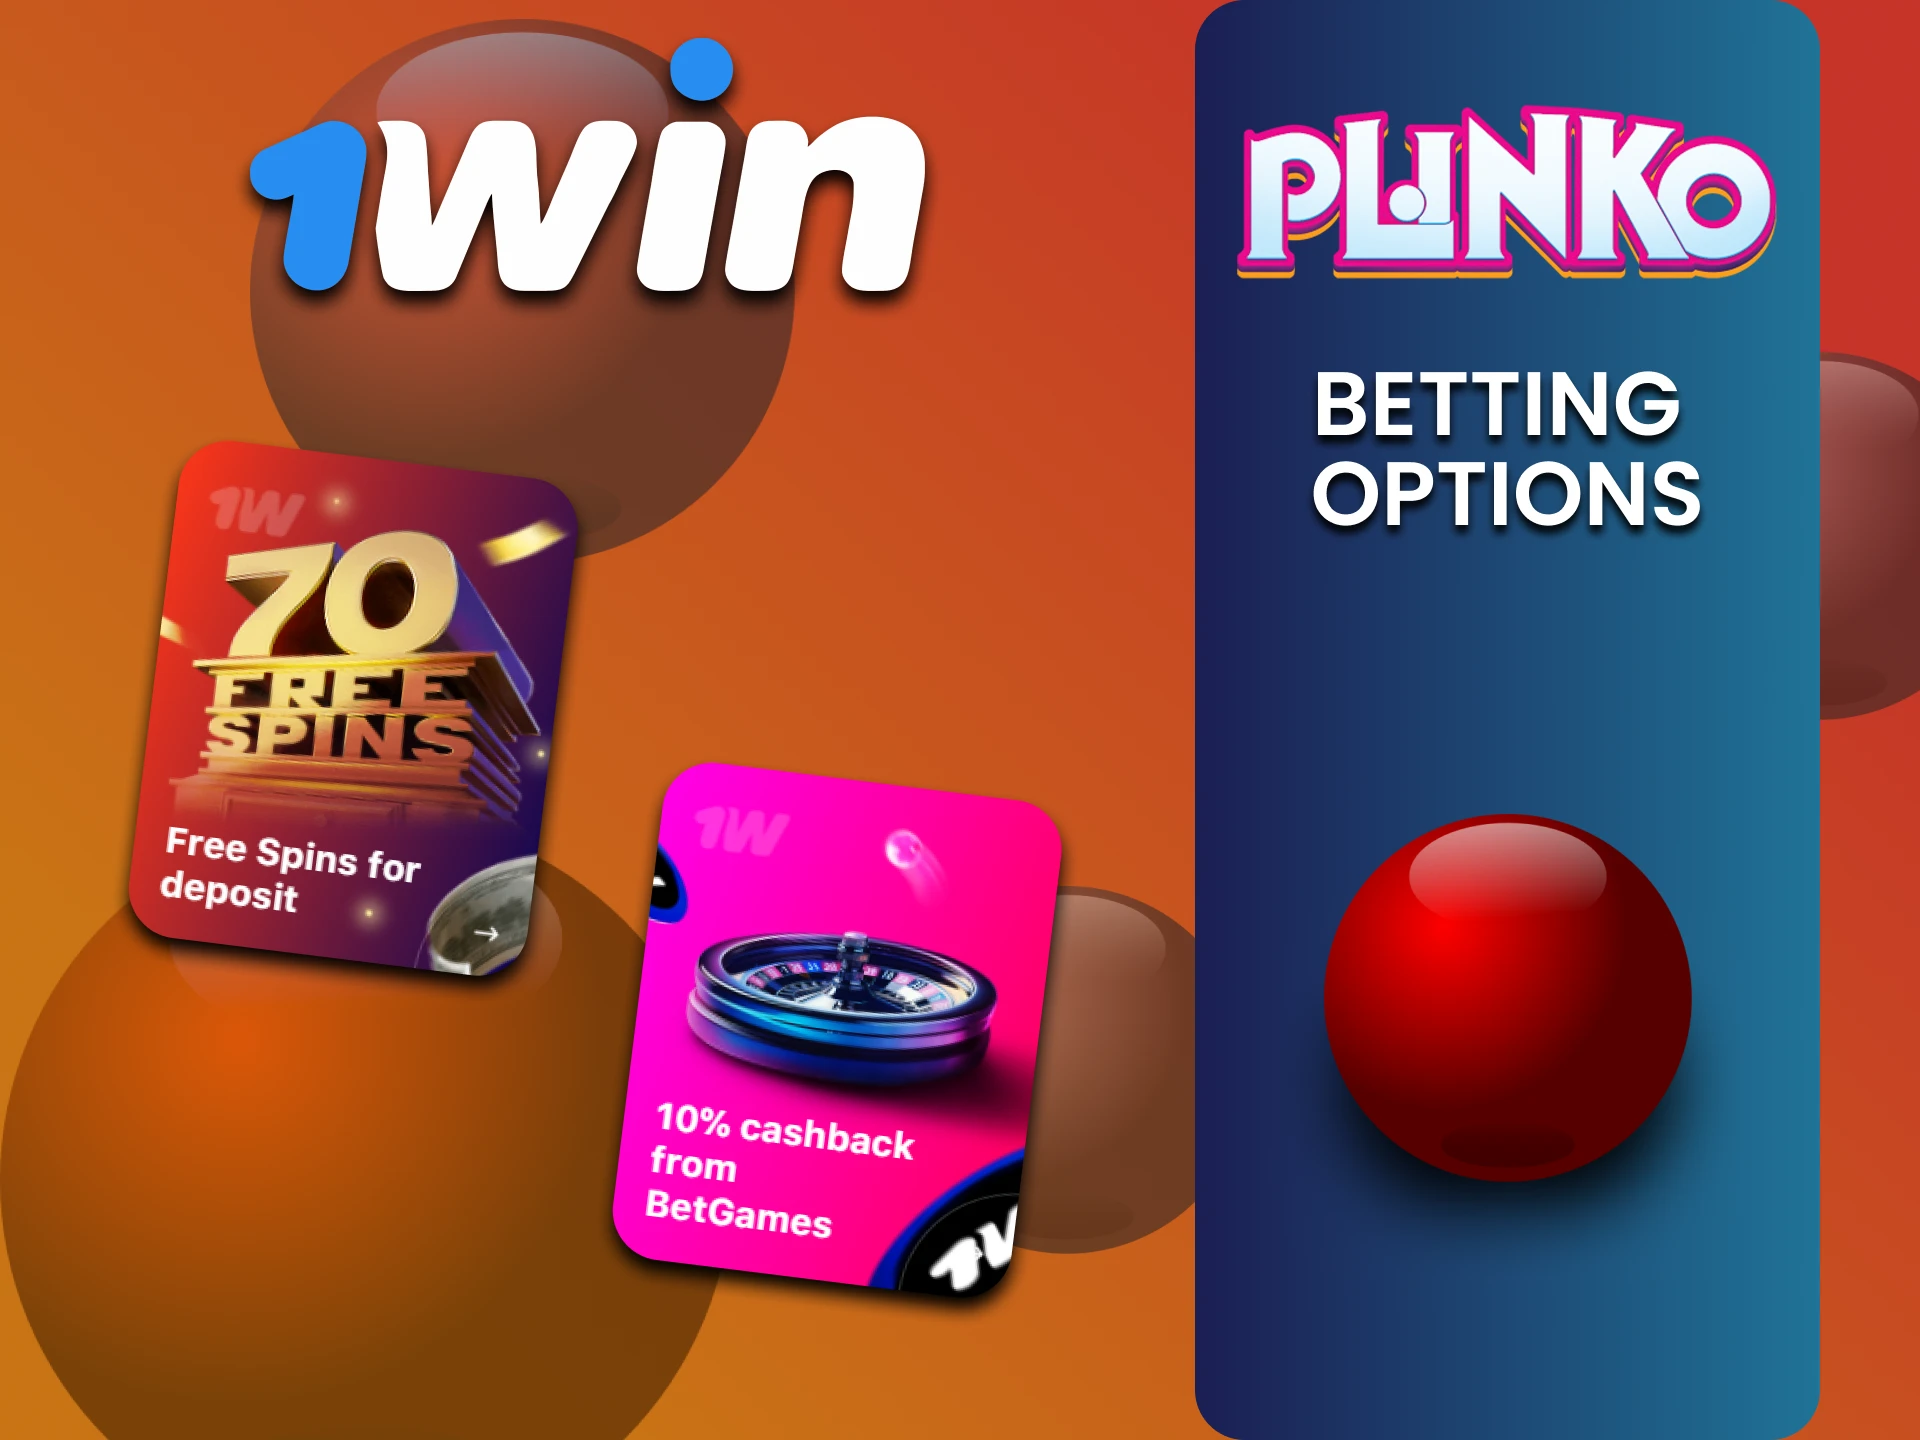 Find out about 1win bonuses for Plinko.